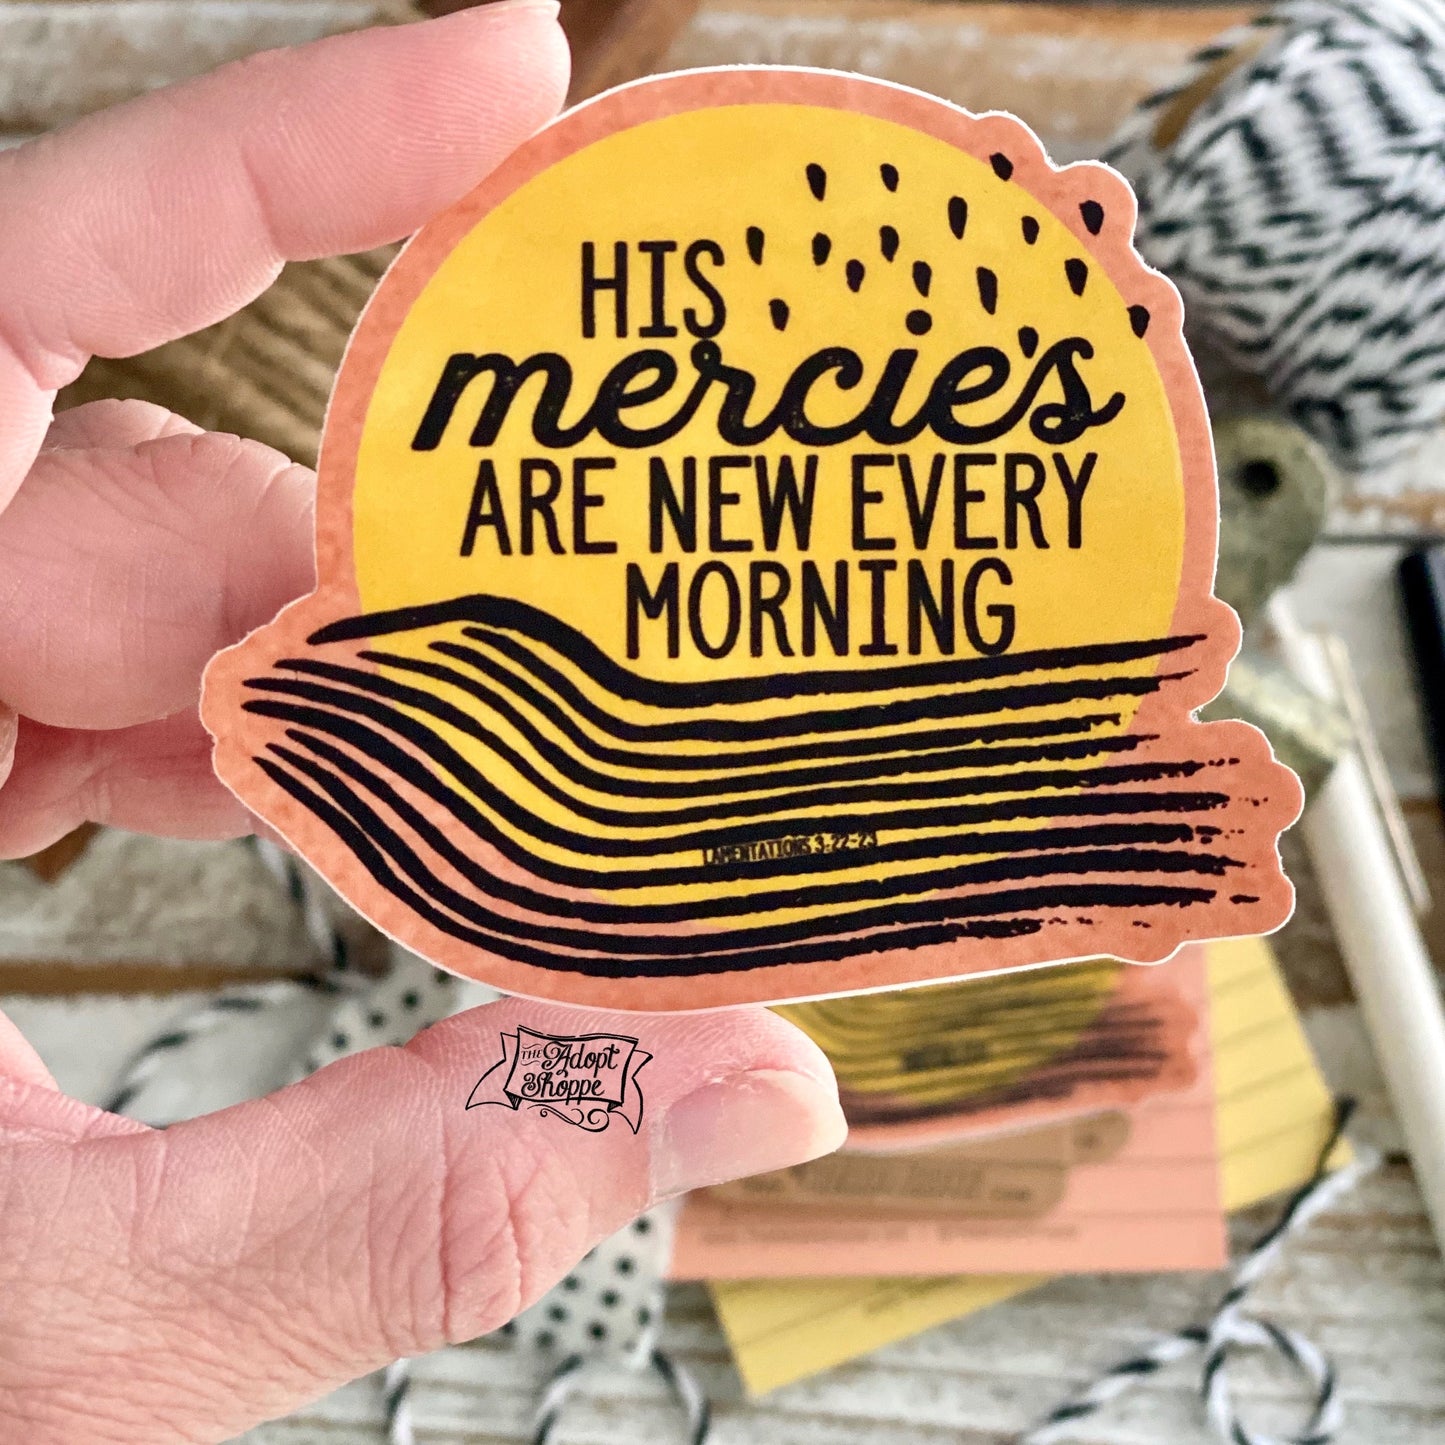 His mercies are new every morning (Lamentations 3:22-23) vinyl sticker